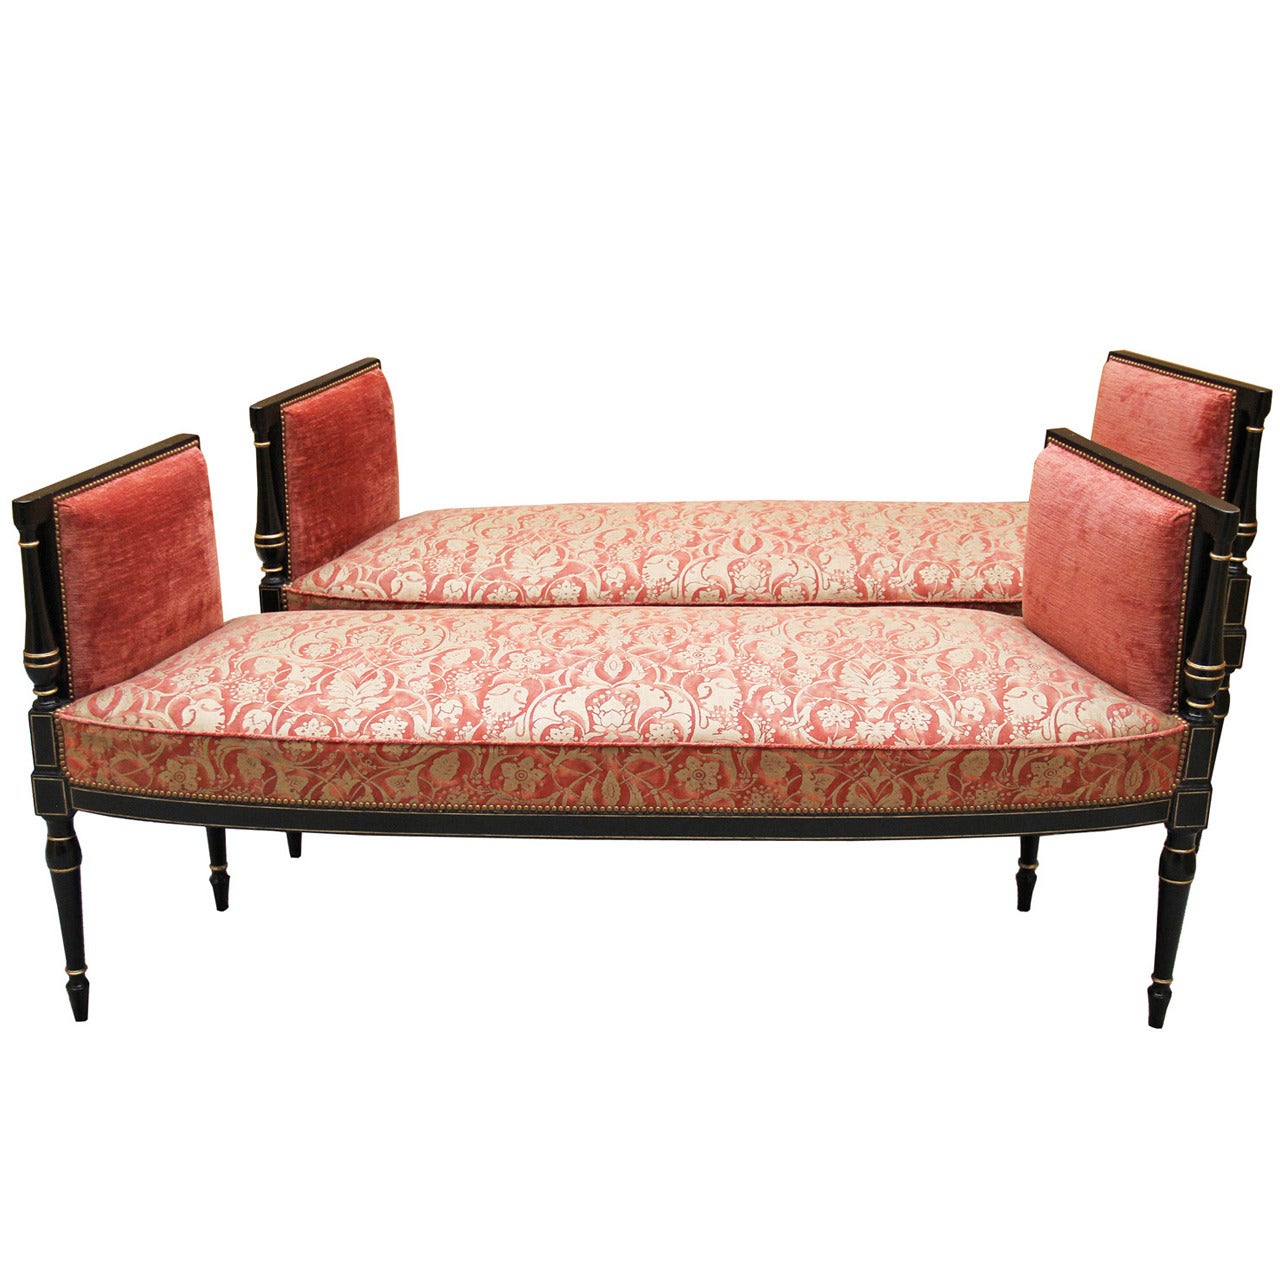 19th Century Pair of English Regency Neoclassical Backless Settees For Sale